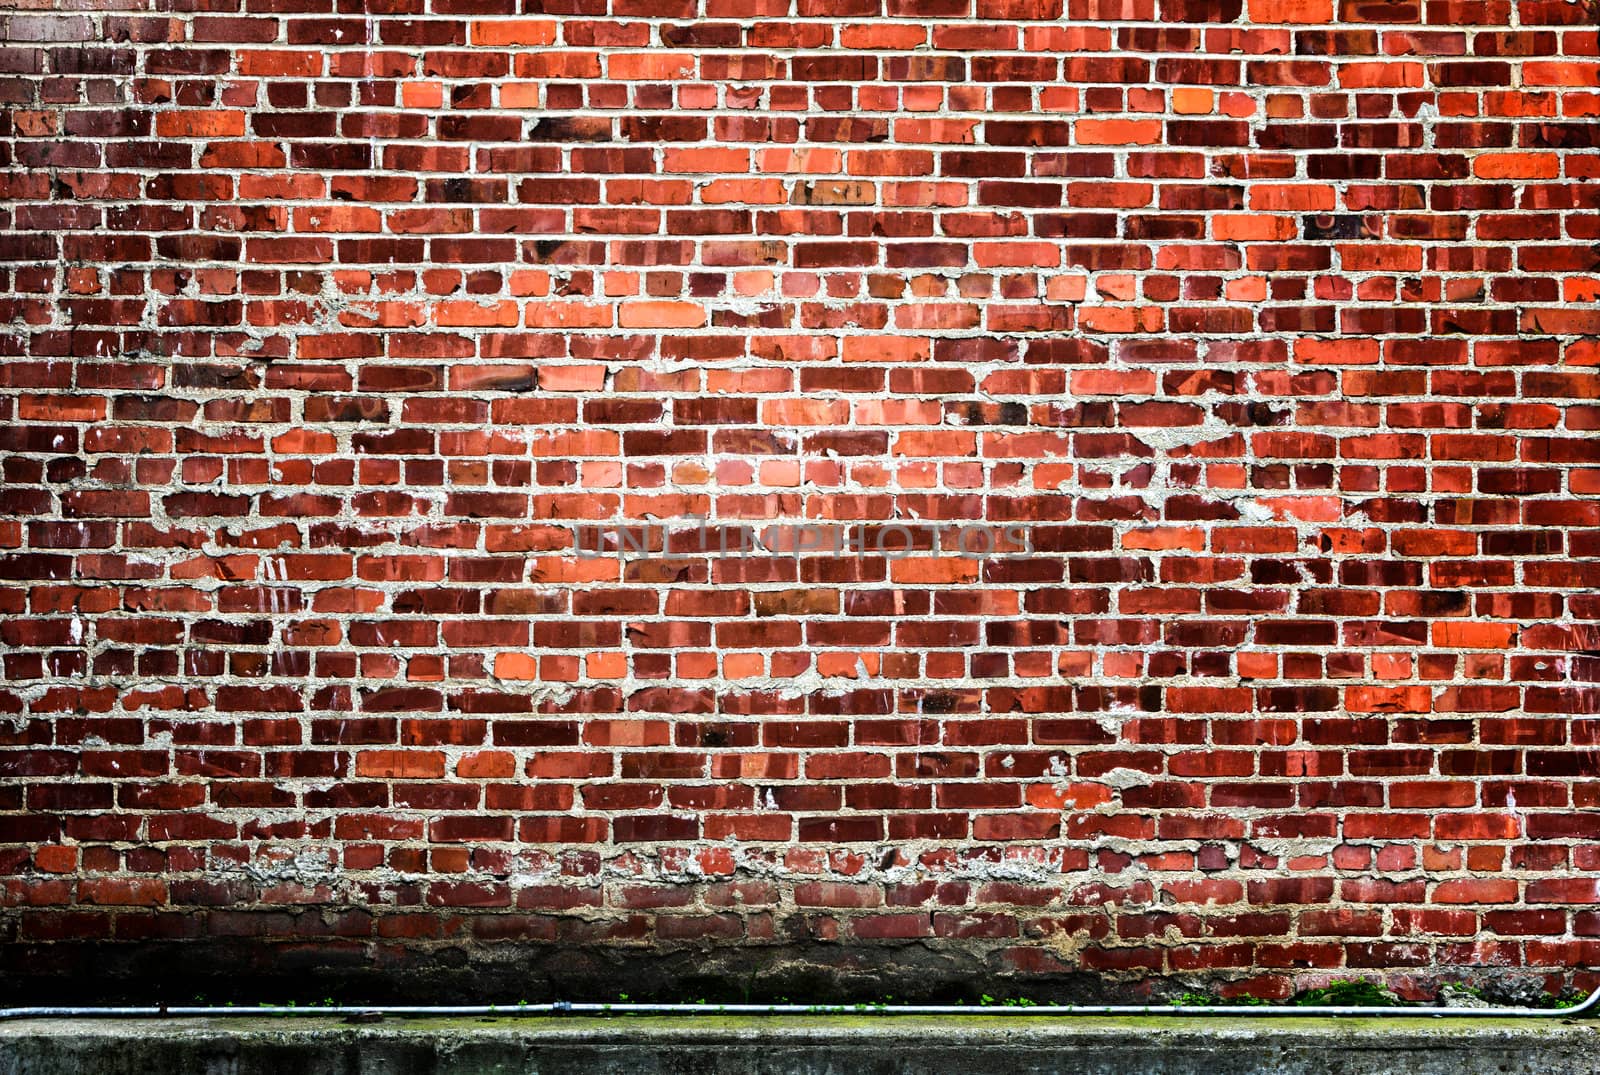 High Contrast Red Brick Backdrop or Background by wolterk